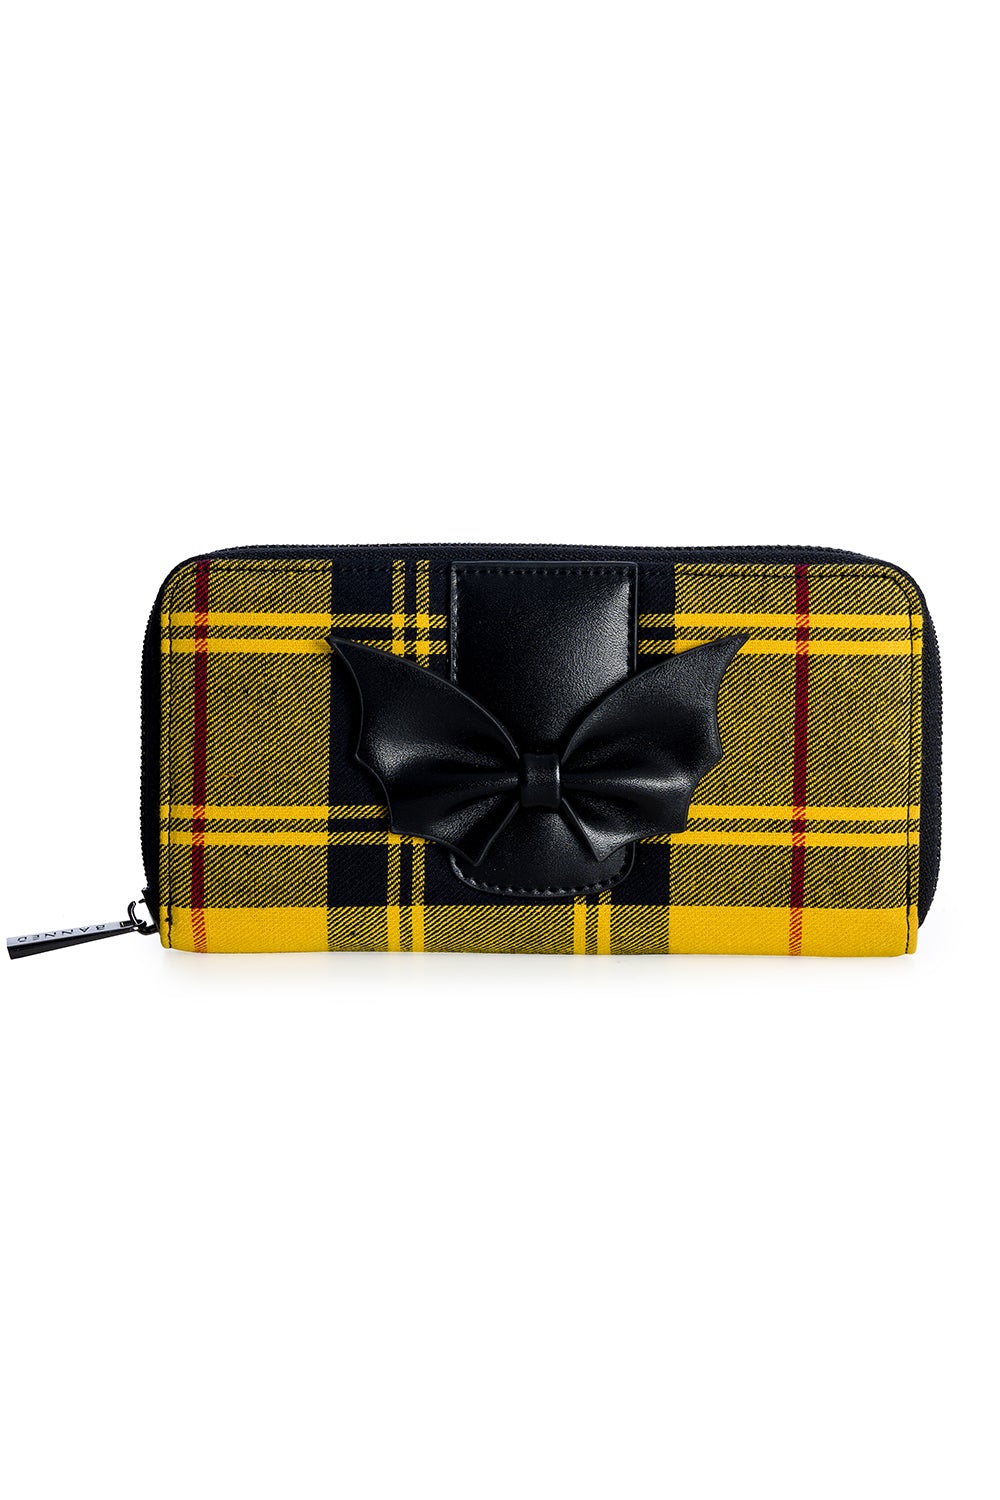 Yellow tartan print purse with bat styled bow detail on the front. 